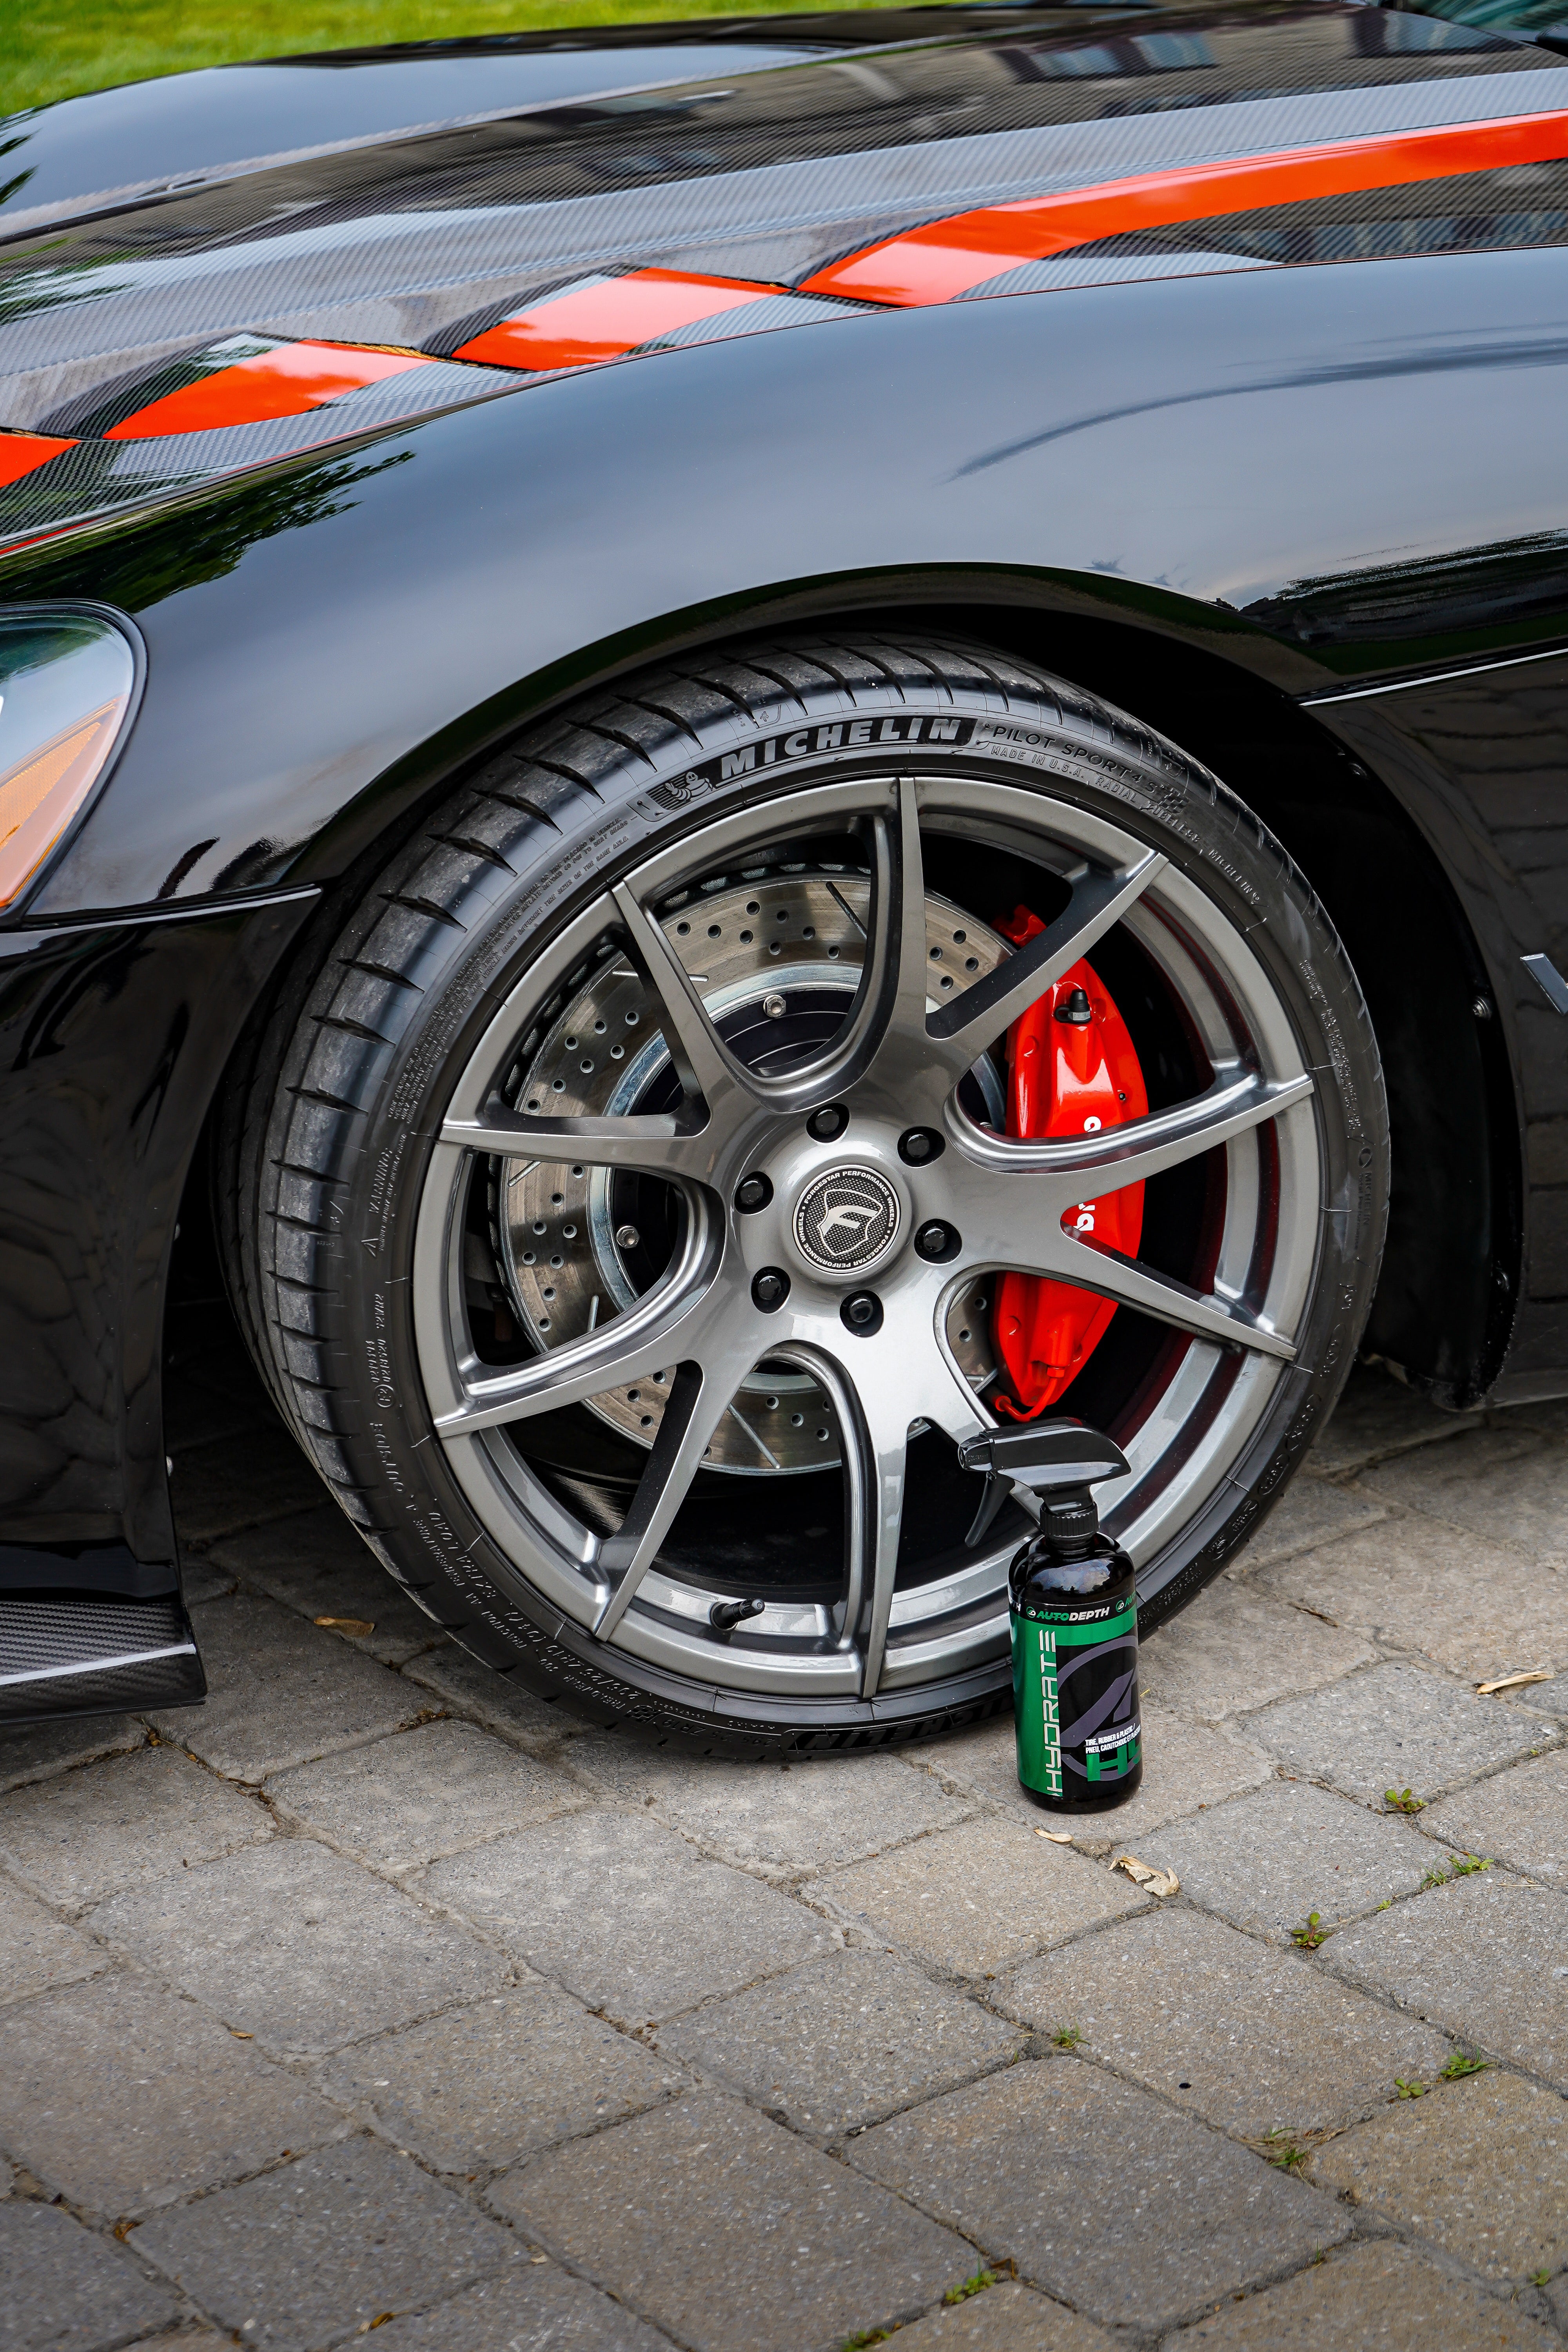 AutoDepth Hydrate Tire Rubber & Plastic Dressing